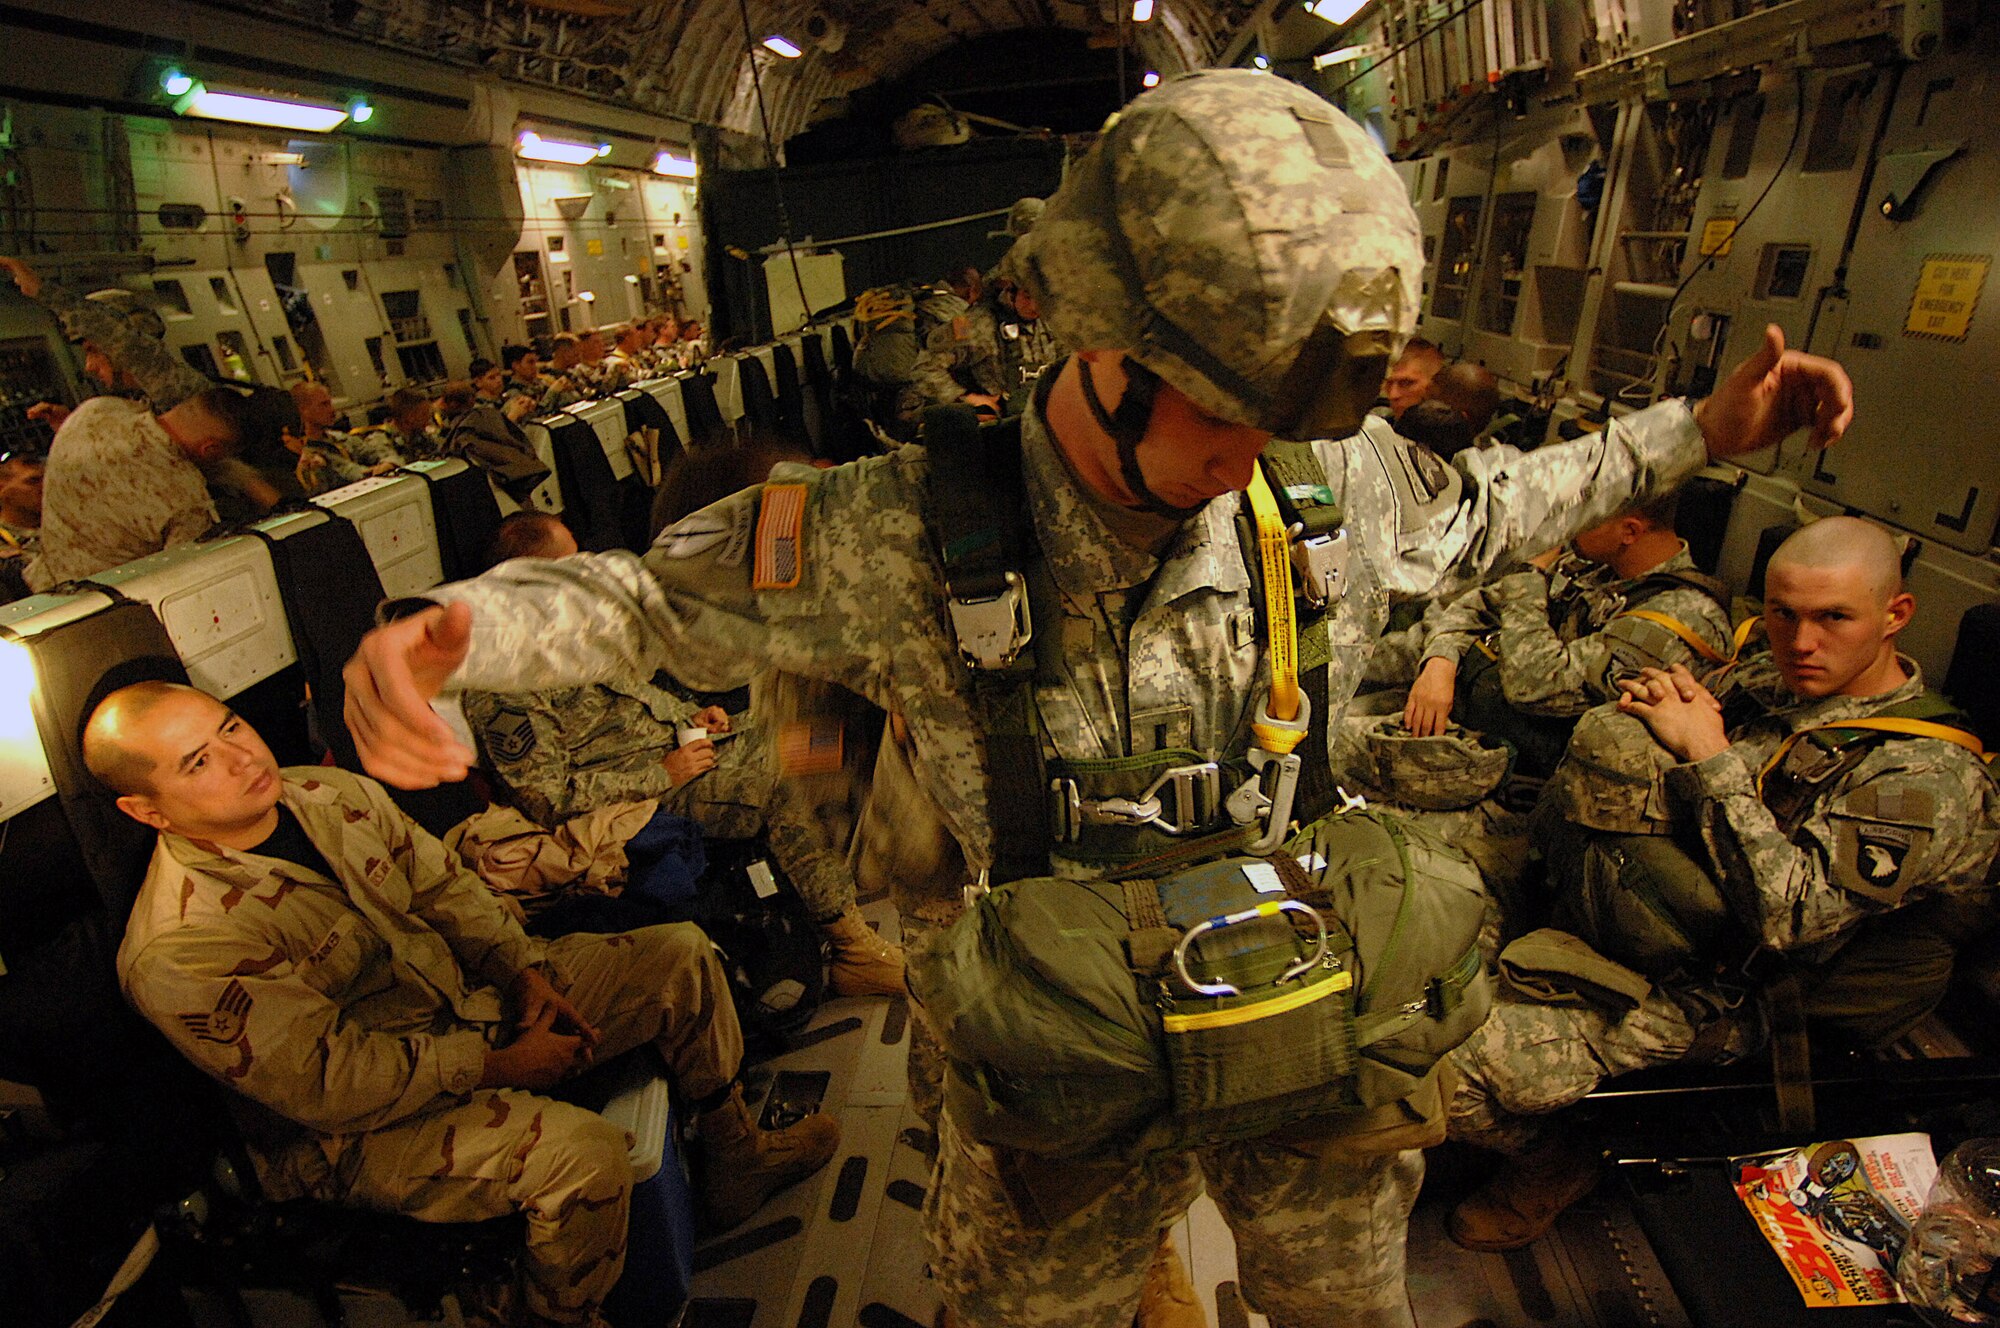 U.S. Army paratroopers from the 20th Engineering Brigade, 101st Airborne Division, Fort Campbell, Ky., and Egyptian paratroopers prepare their chutes aboard a Charleston Air Force Base, S.C., C-17 Globemaster III aircraft for an air drop into Cairo, Egypt, Nov. 7 as part of exercise Bright Star 2007. (U.S Air Force photo/Staff Sgt. Aaron Allmon)